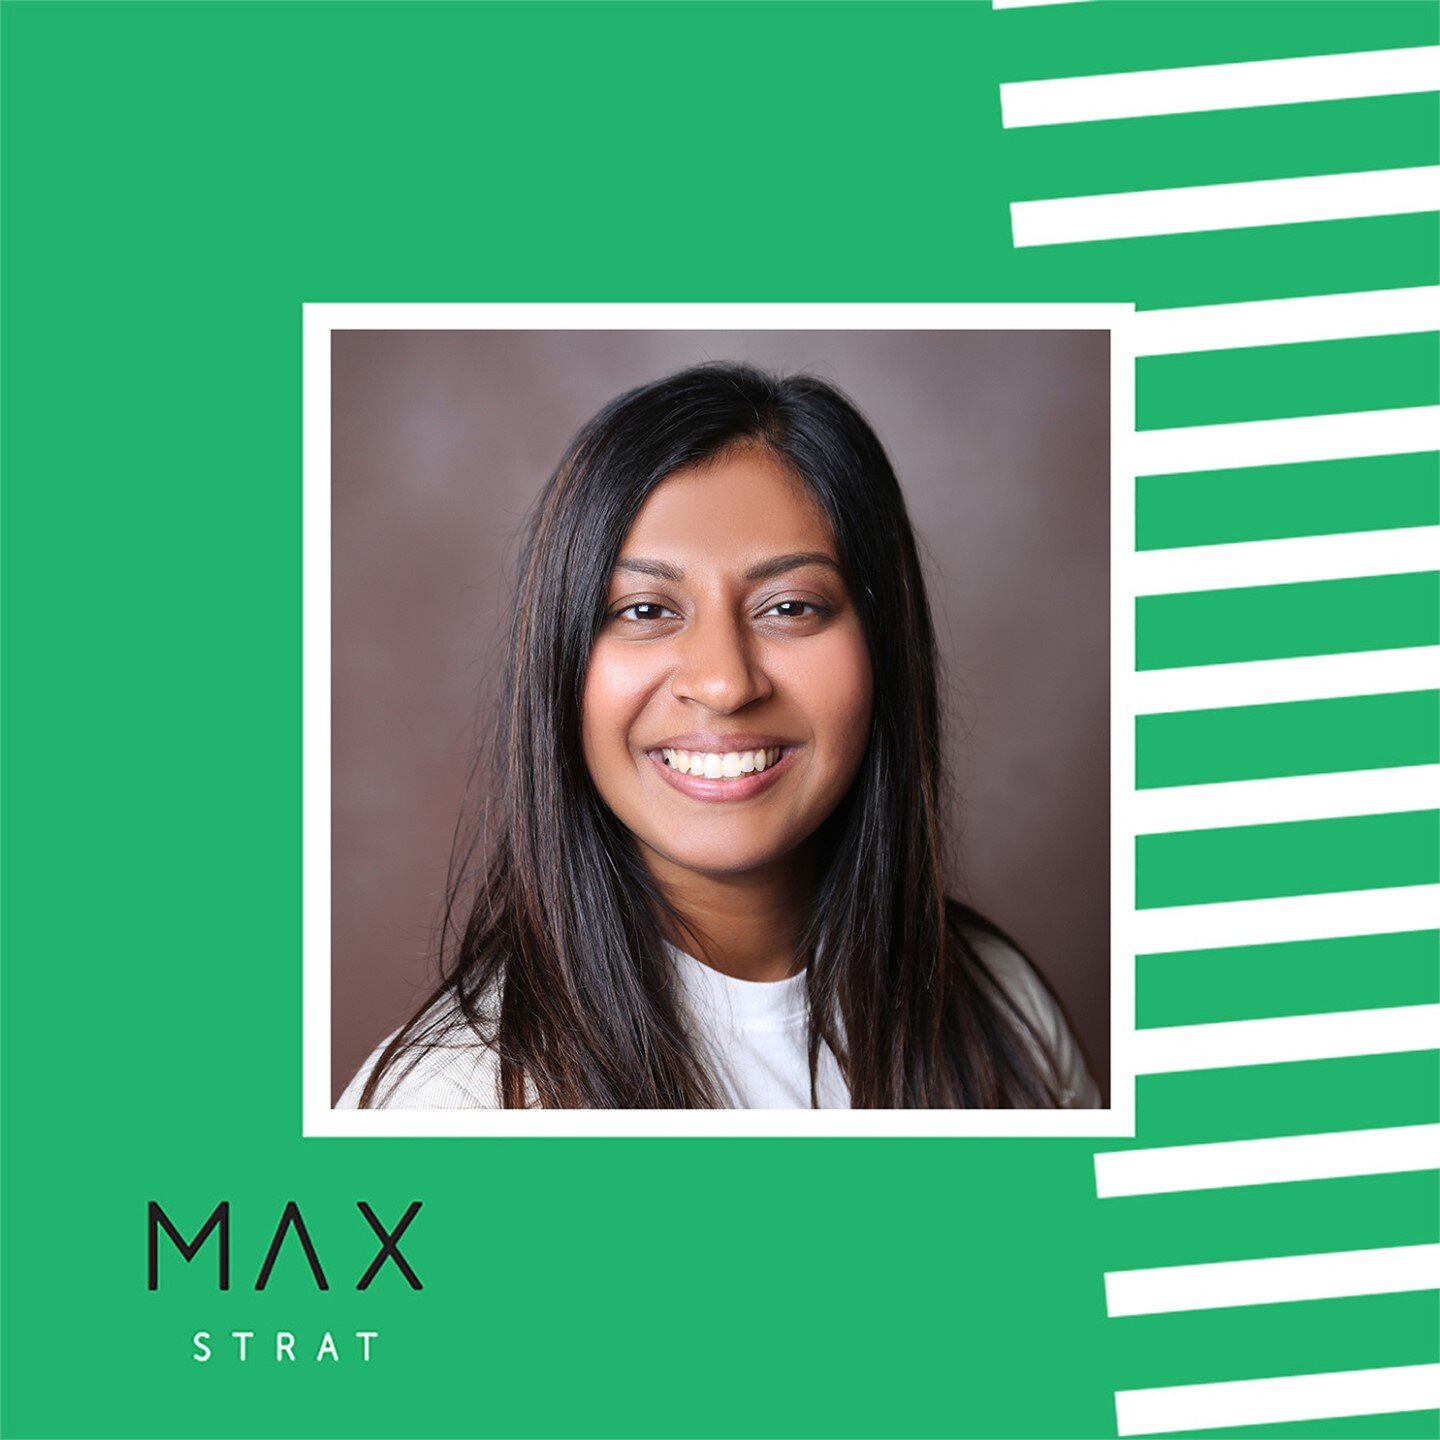 Yoooooo... We told you we had big things coming. One of those things includes adding another new face to our team! 😏

Everyone, say &quot;Hi, Hello, What's up?&quot; to Neha Patel! 👋
Neha Patel joined the MaxStrat team as our Staff Project Coordina